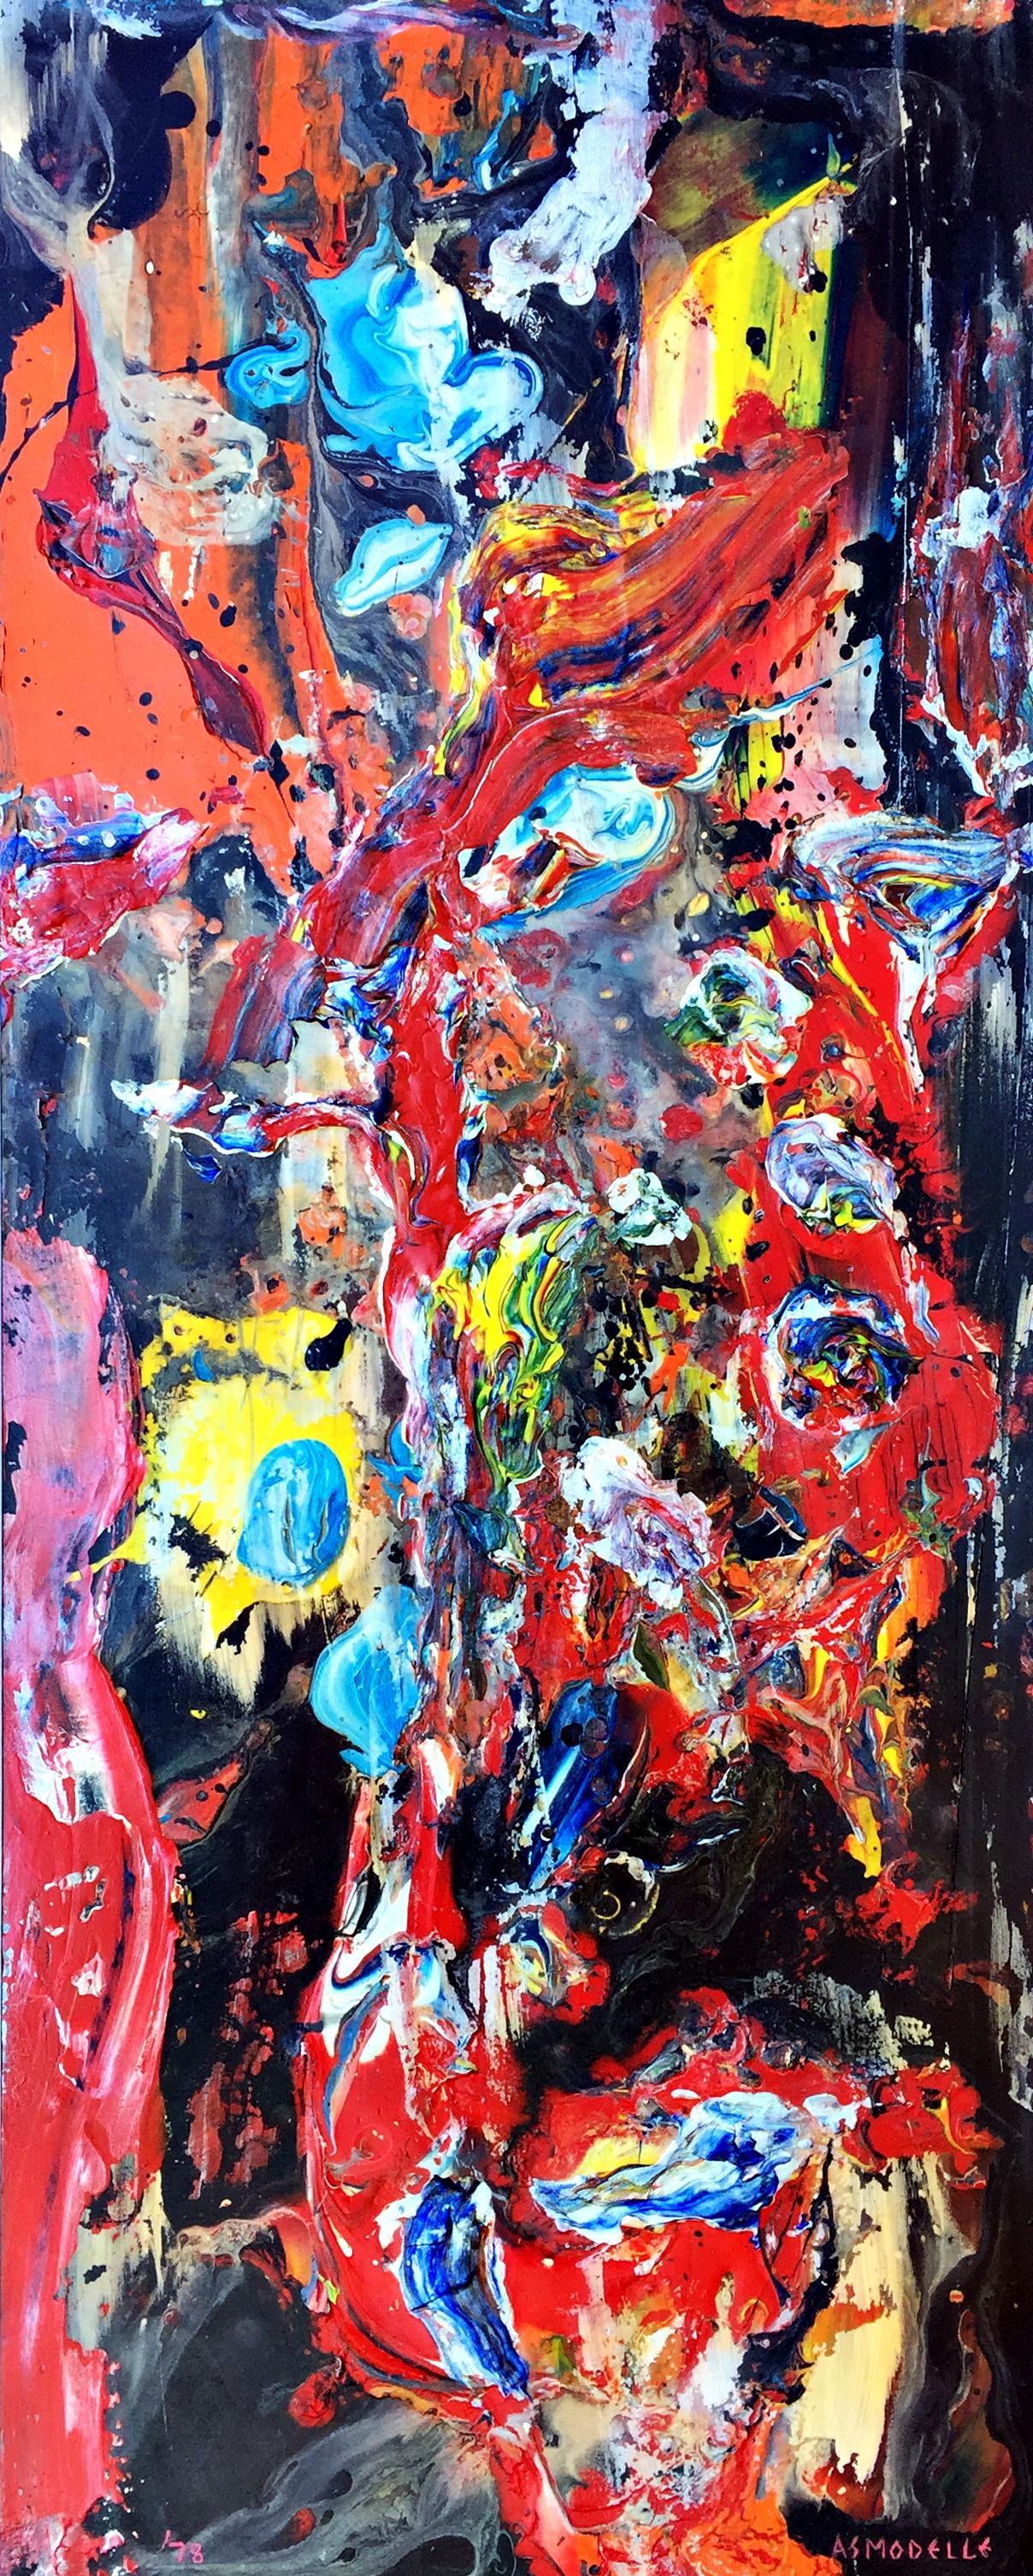 Gender Transmorphing (diptych) - Abstract Expressionist Painting by Estelle Asmodelle